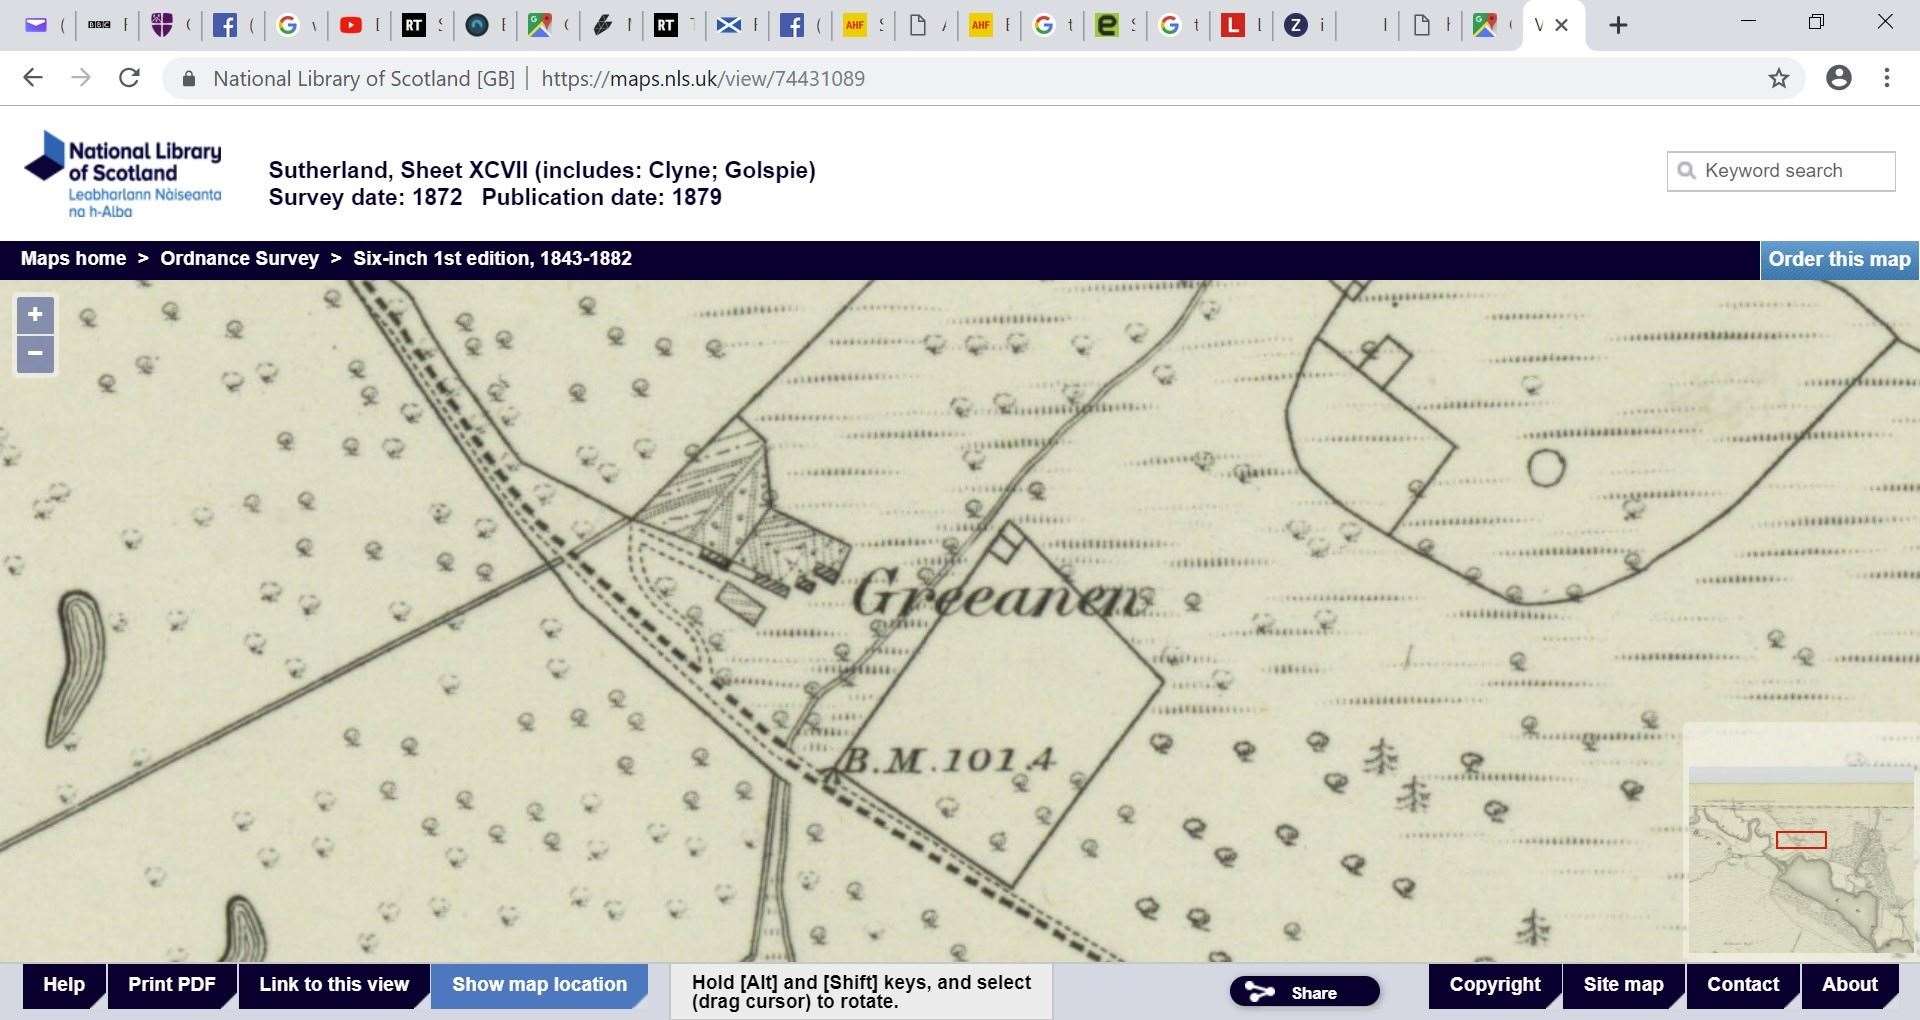 The Greeanan site as shown on the Ordnance Survey map of 1879.